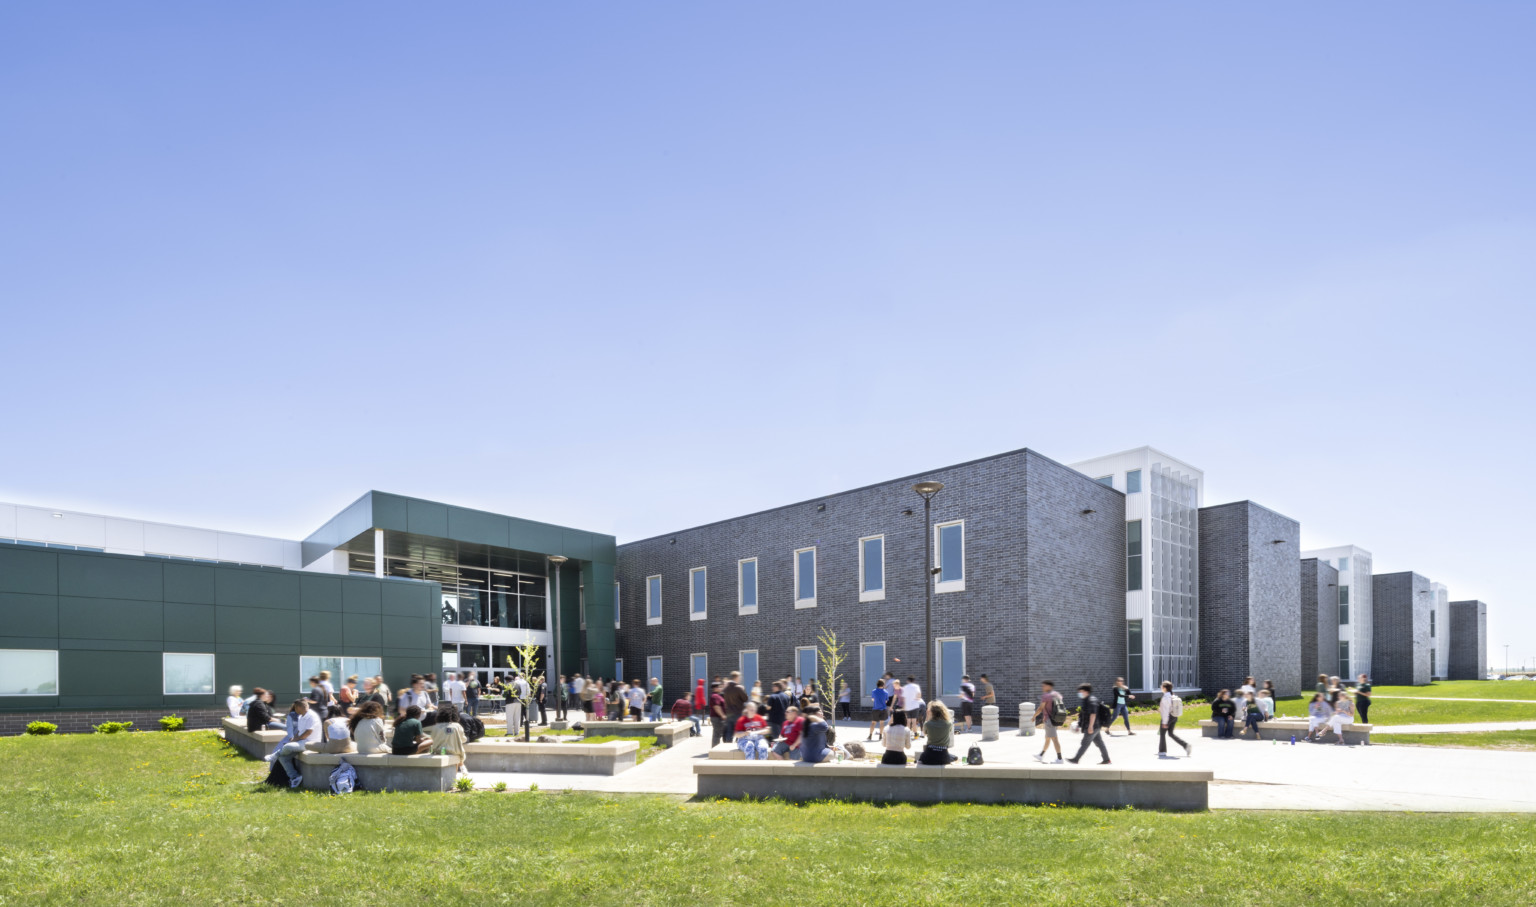 Exterior courtyard of Sioux Falls' Jefferson High School with wrapped facade square entry